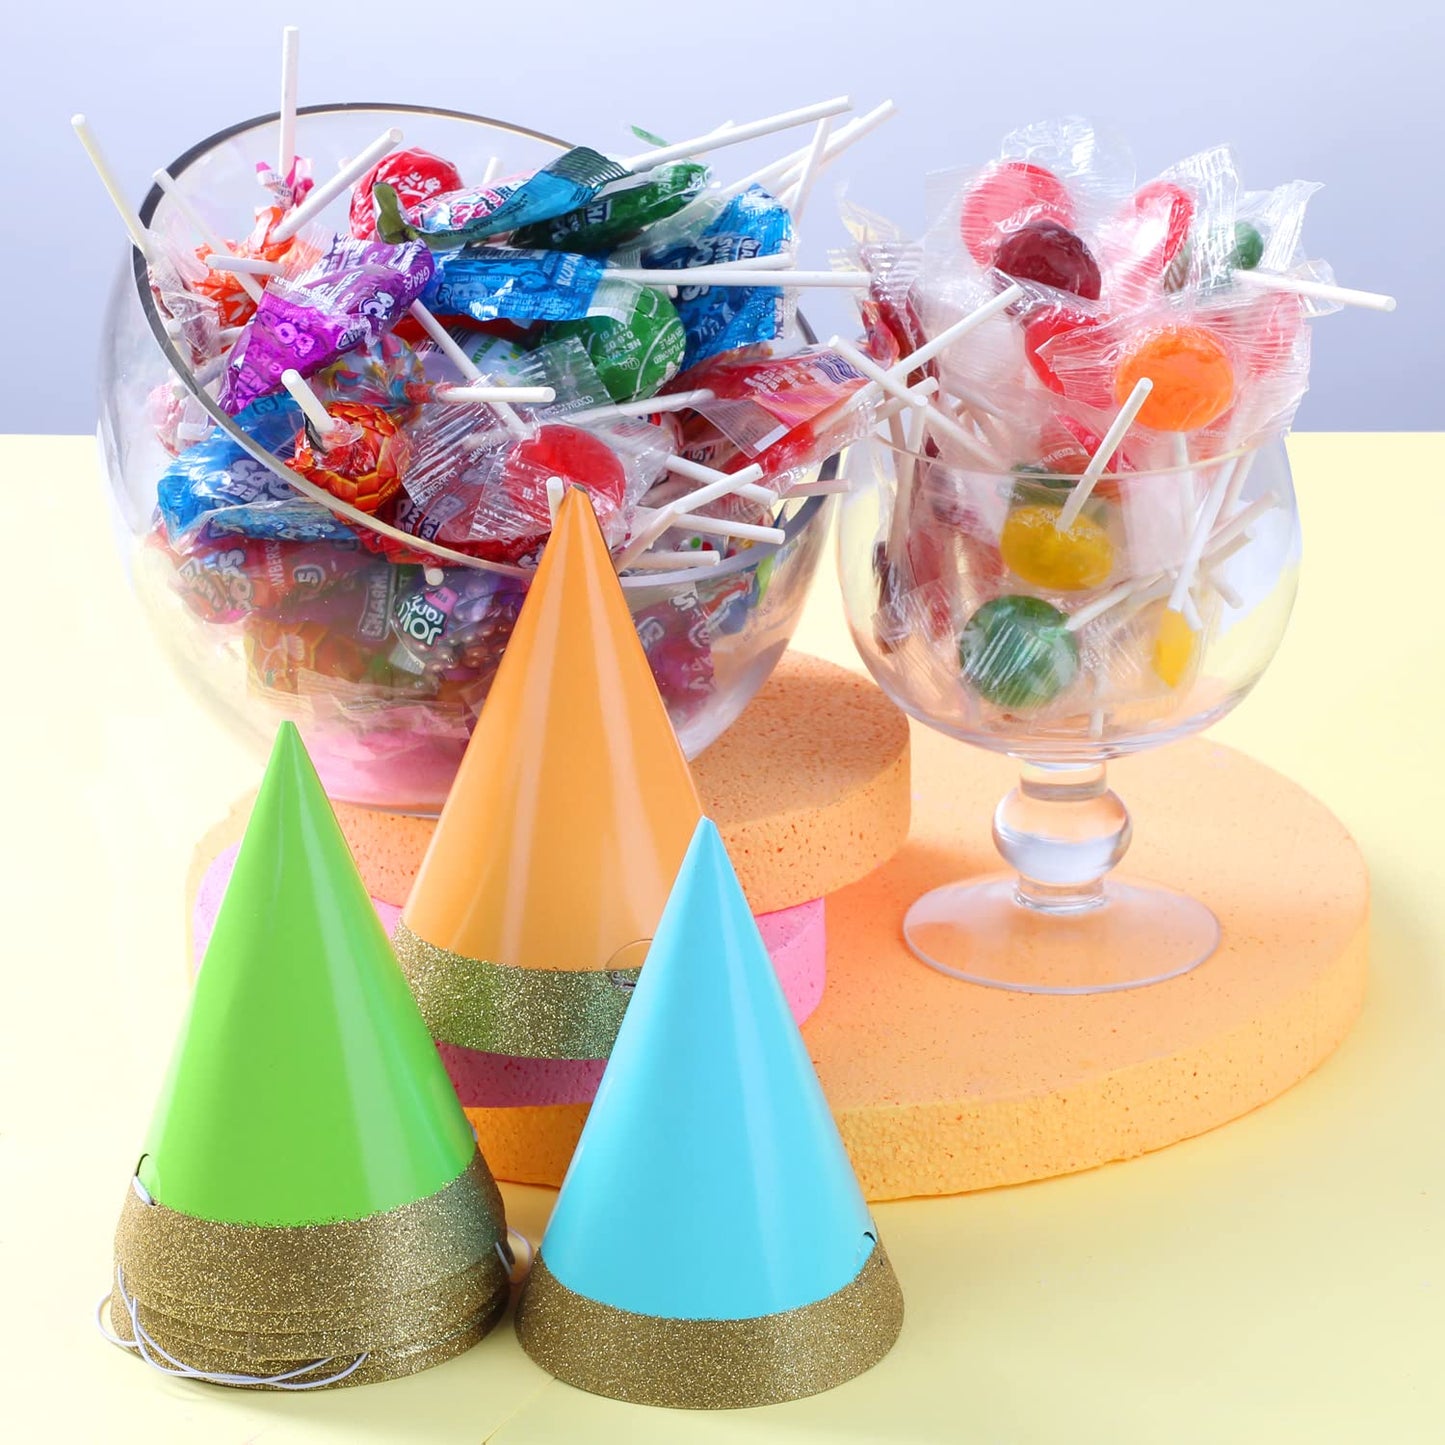 Lollipops - Candy Suckers - Classic Lollipops - Assorted Fruit Flavors - Parade Candies for Kids - Party Candy Goodie Bag Fillers - Pinata Stuffers - Assorted Colors, 4 LB Bulk Candy (approximately 240 pieces)